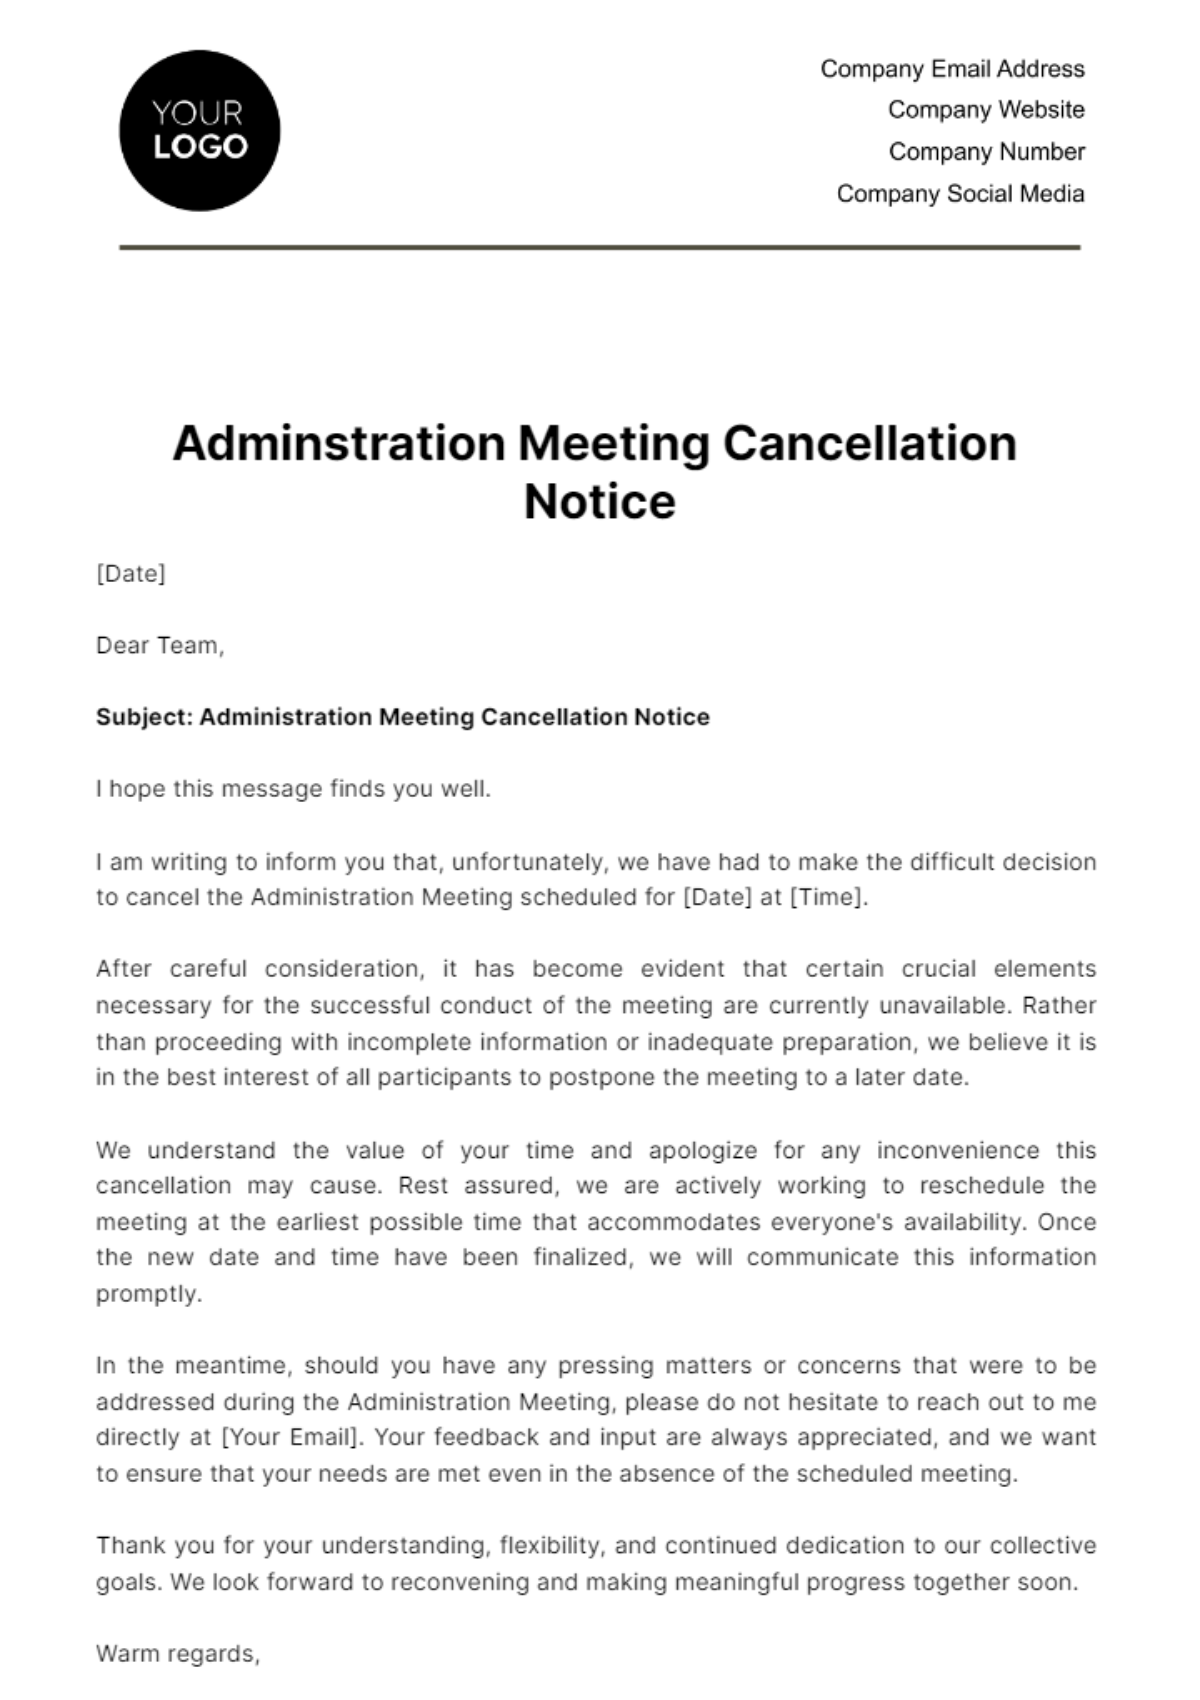 Free Administration Meeting Cancellation Notice Template